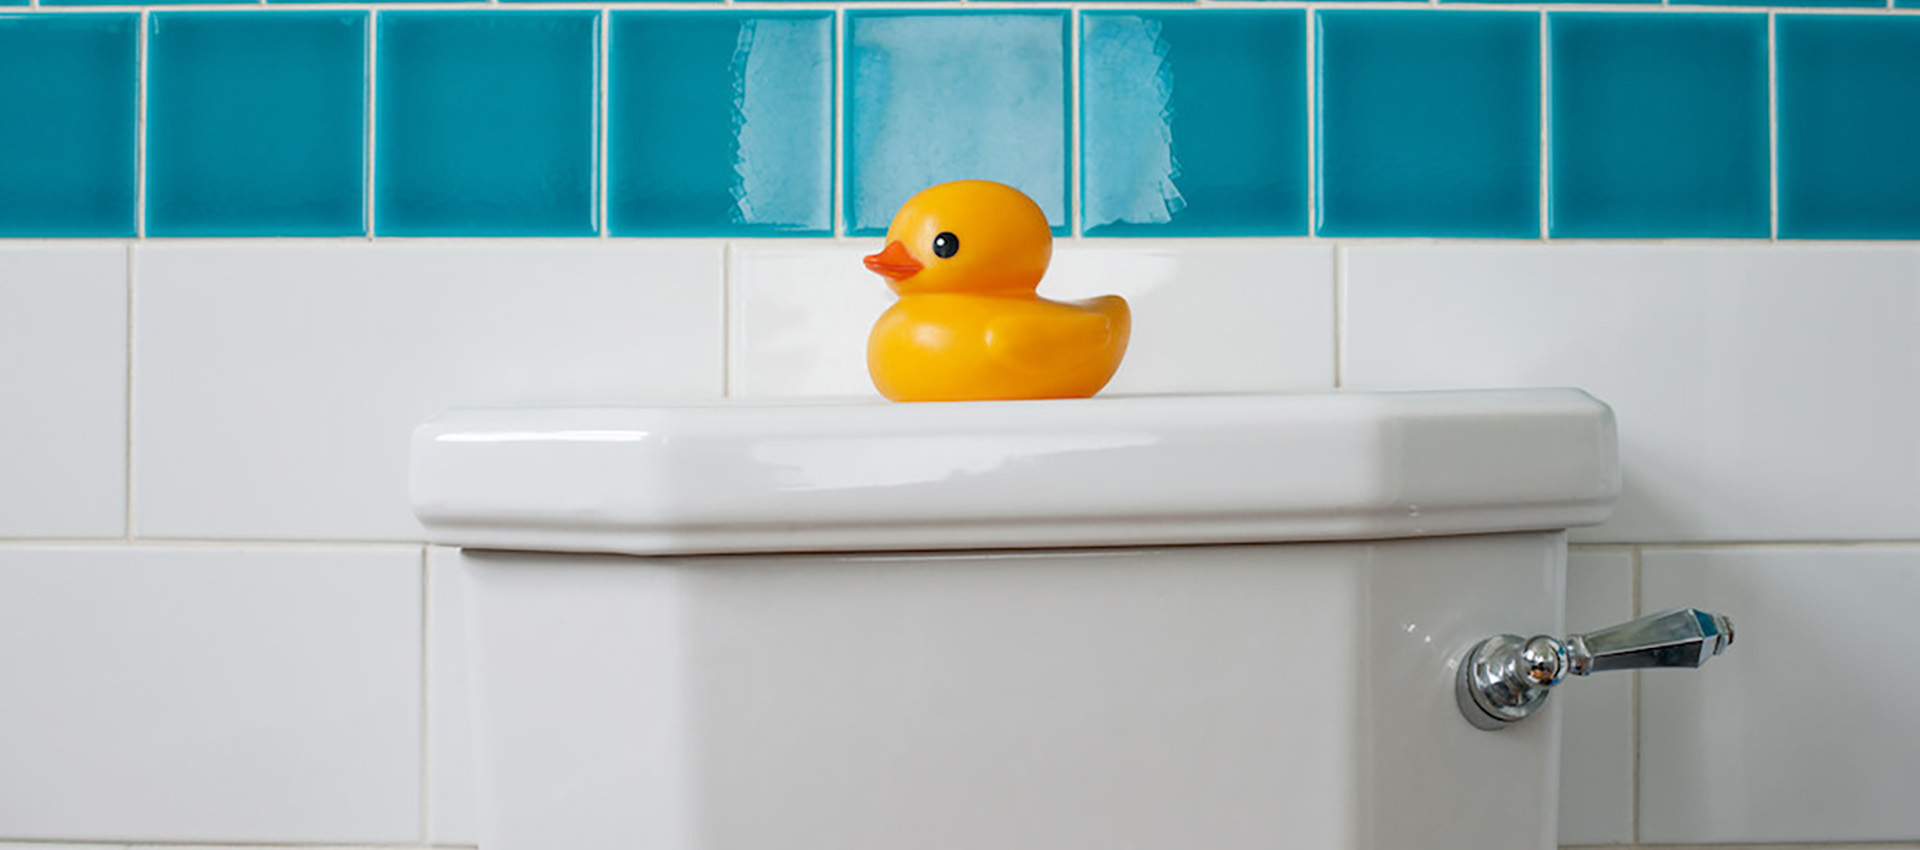 Image of a rubber ducky in the bathroom